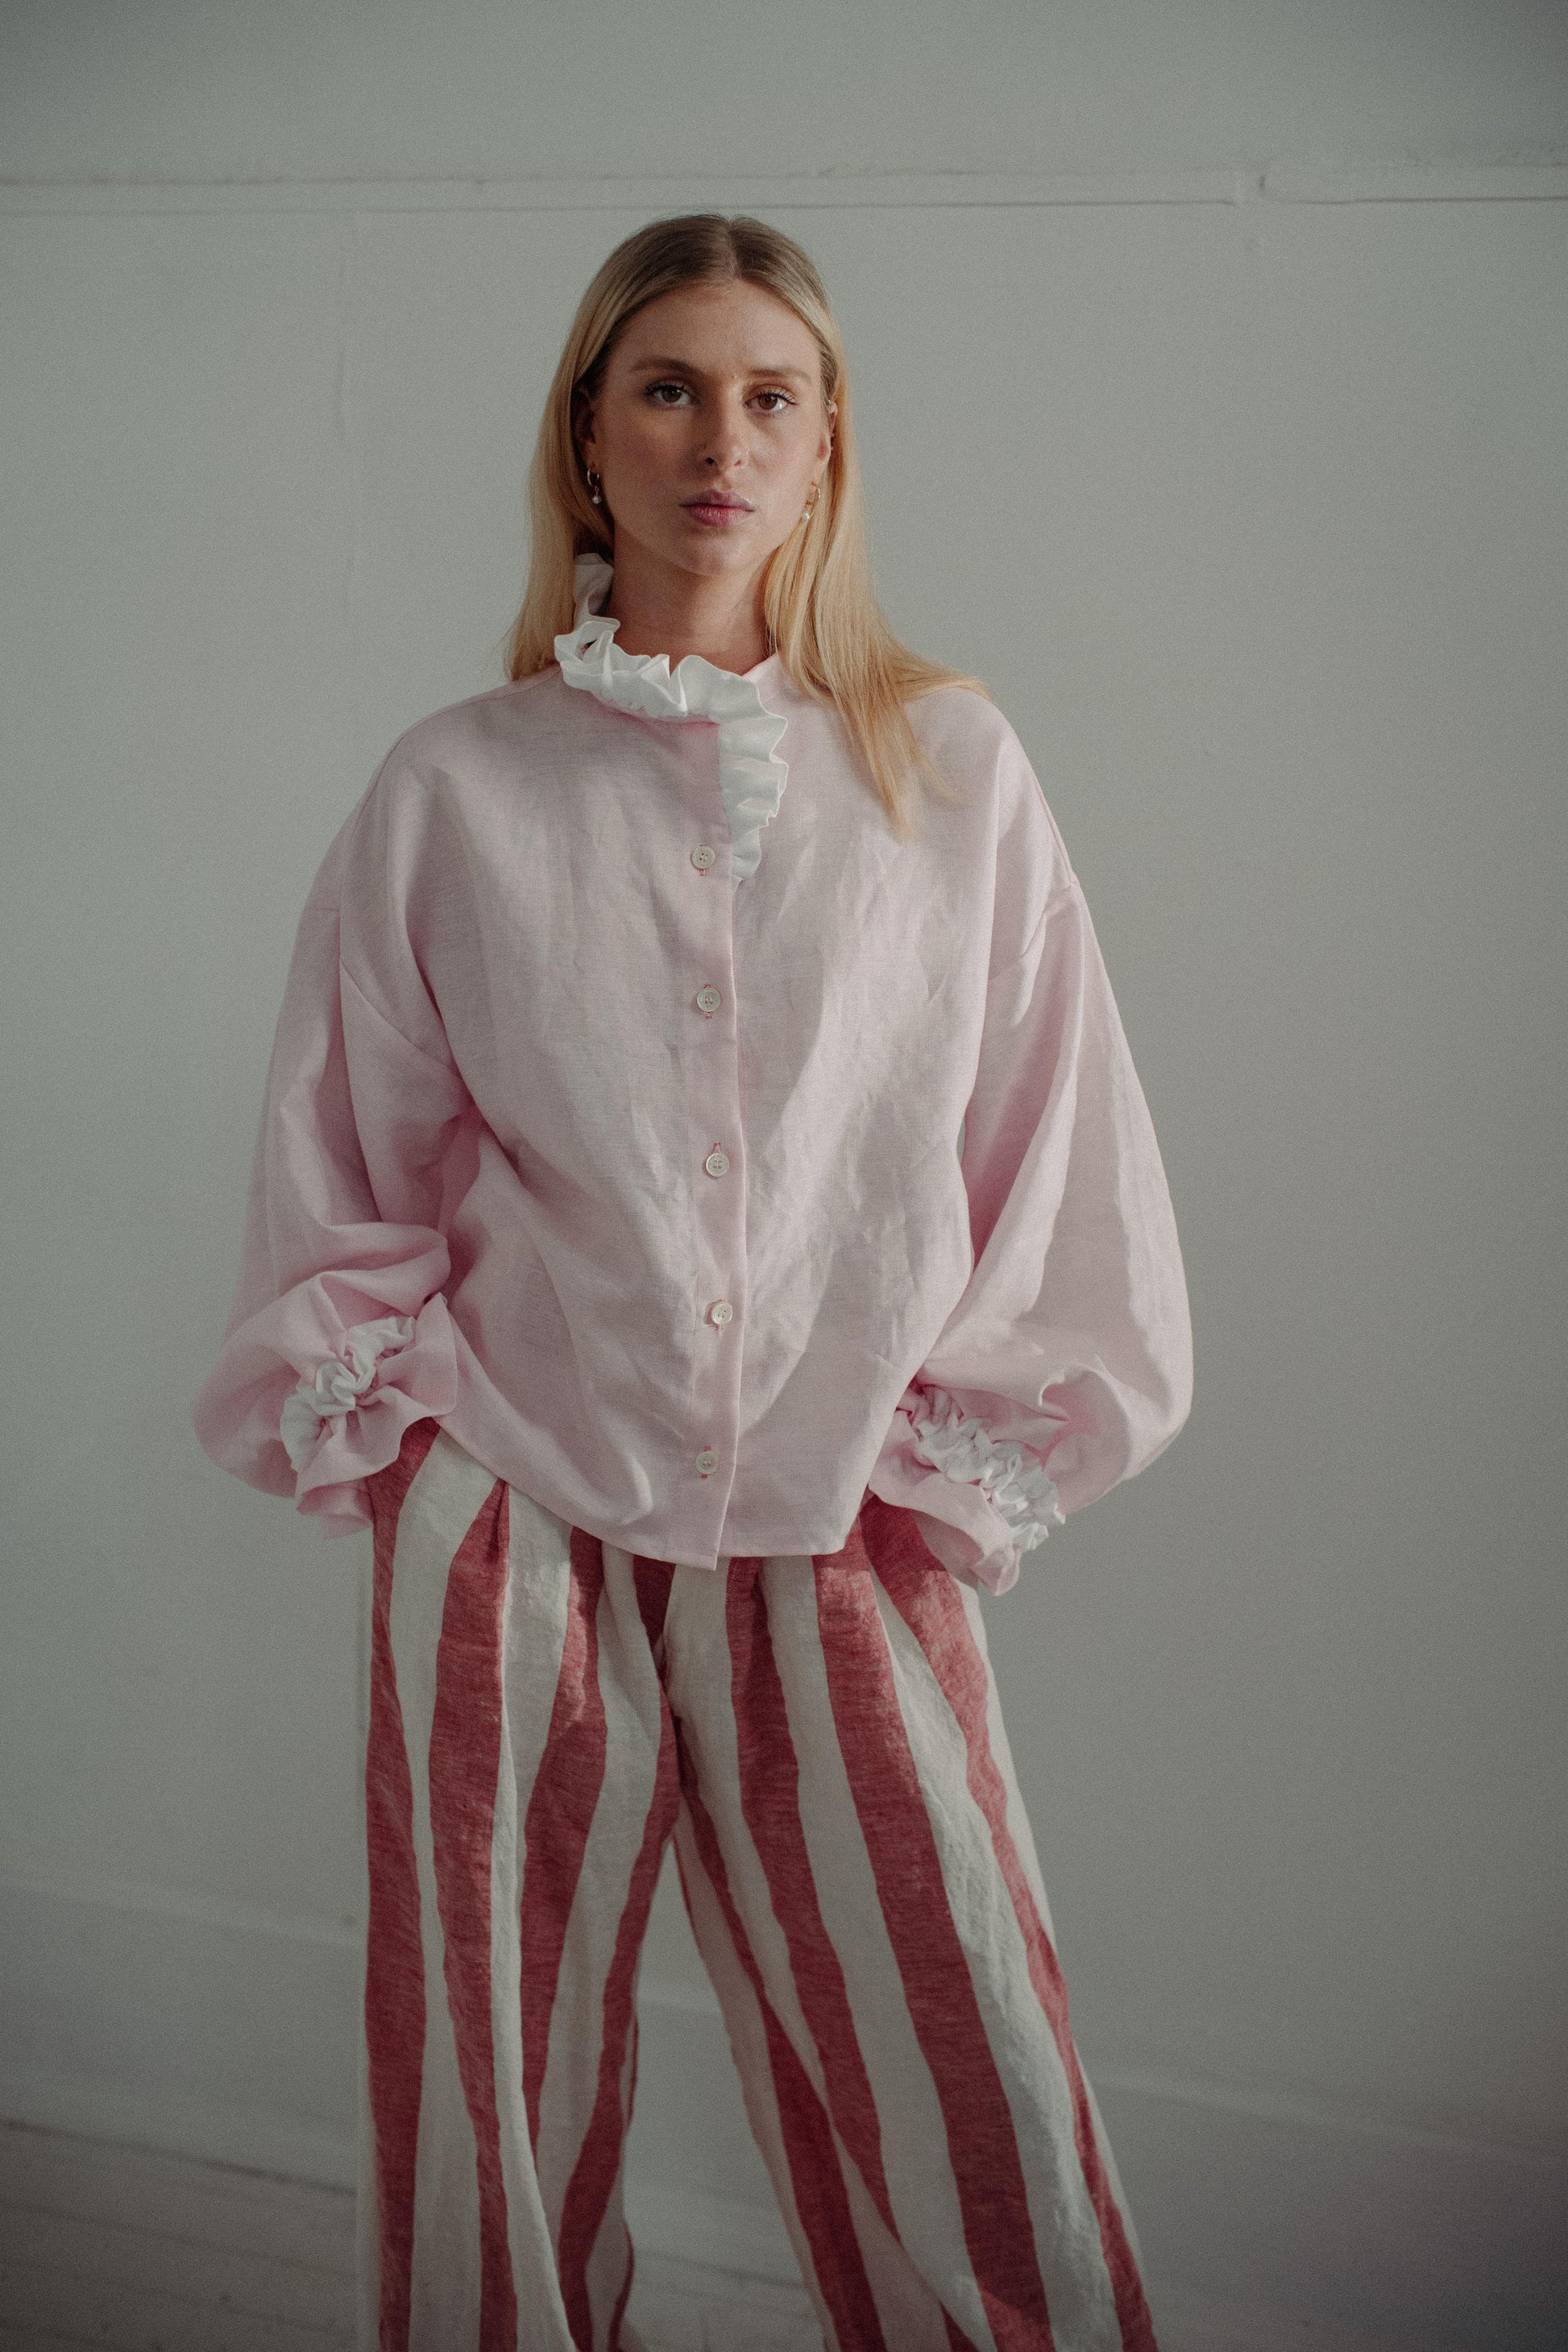 MARSHMALLOW BLOUSE | The Marshmallow Blouse is a fun interpretation of a favourite summer memory of toasting marshallows round the fire on the beach. The shirt features an assymetric frill detail on the collar - one side has structured white frills and th